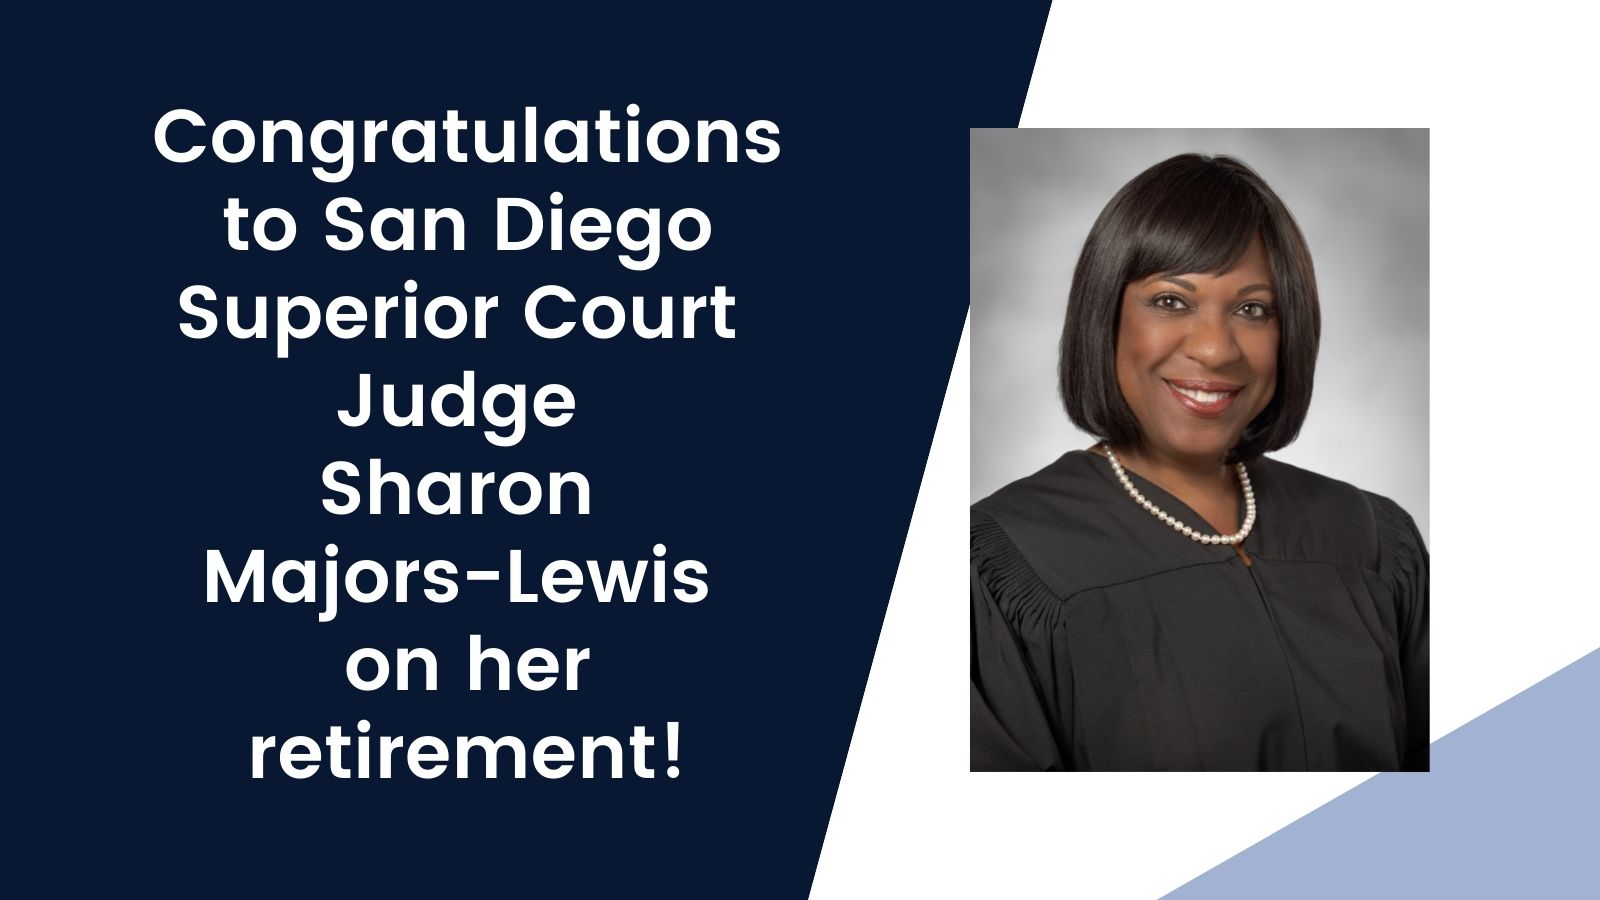 Congratulations to Judge Majors-Lewis on her retirement